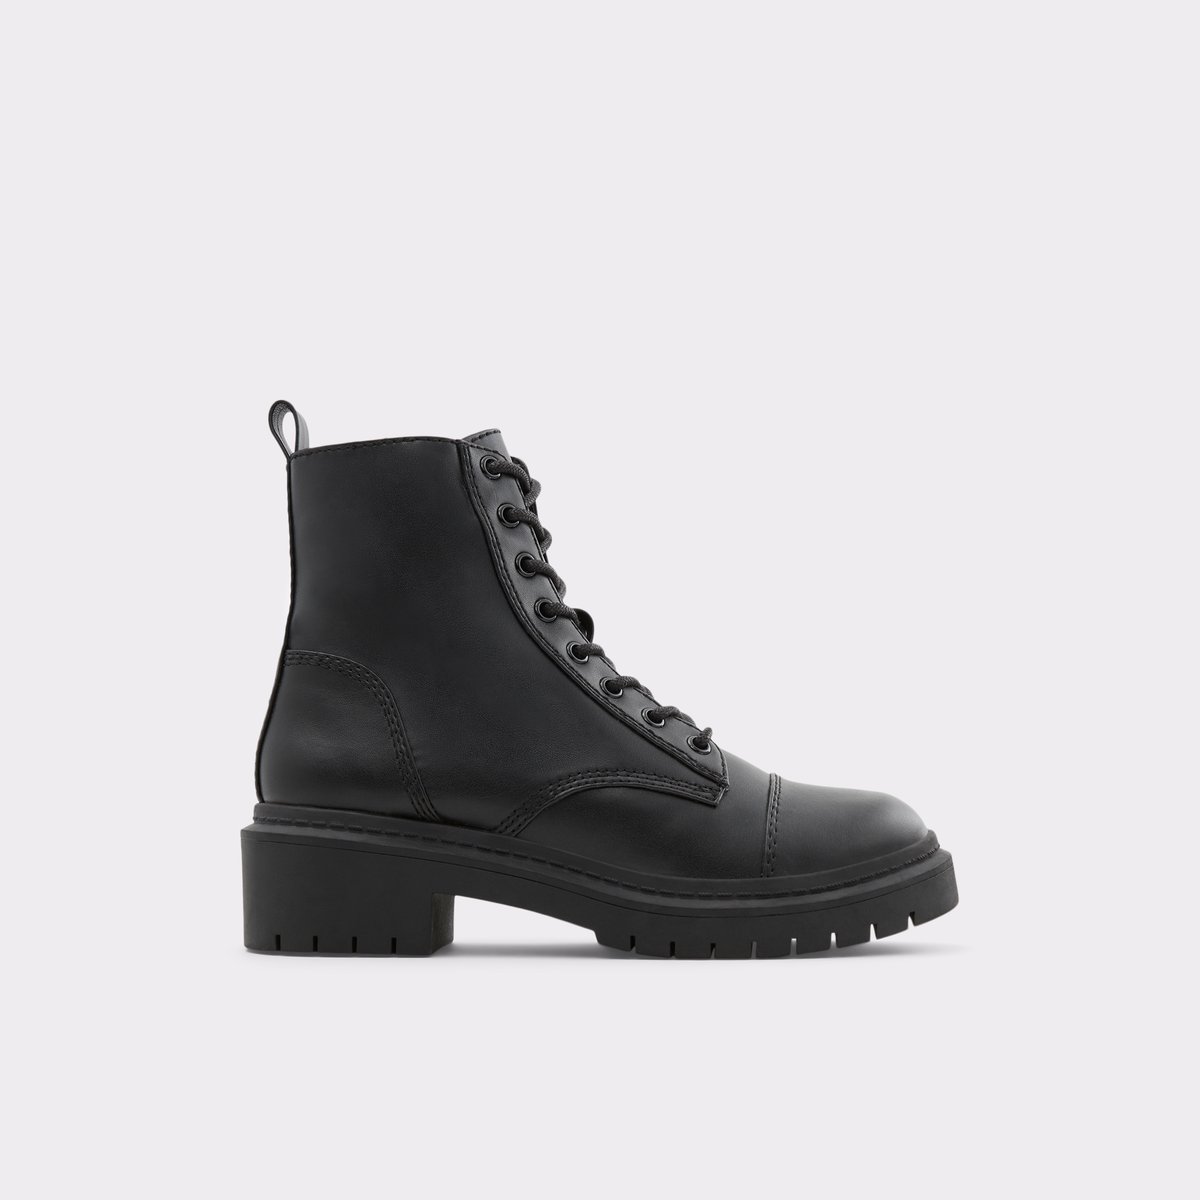 Goer Black Synthetic Smooth Women's Winter boots | ALDO Canada